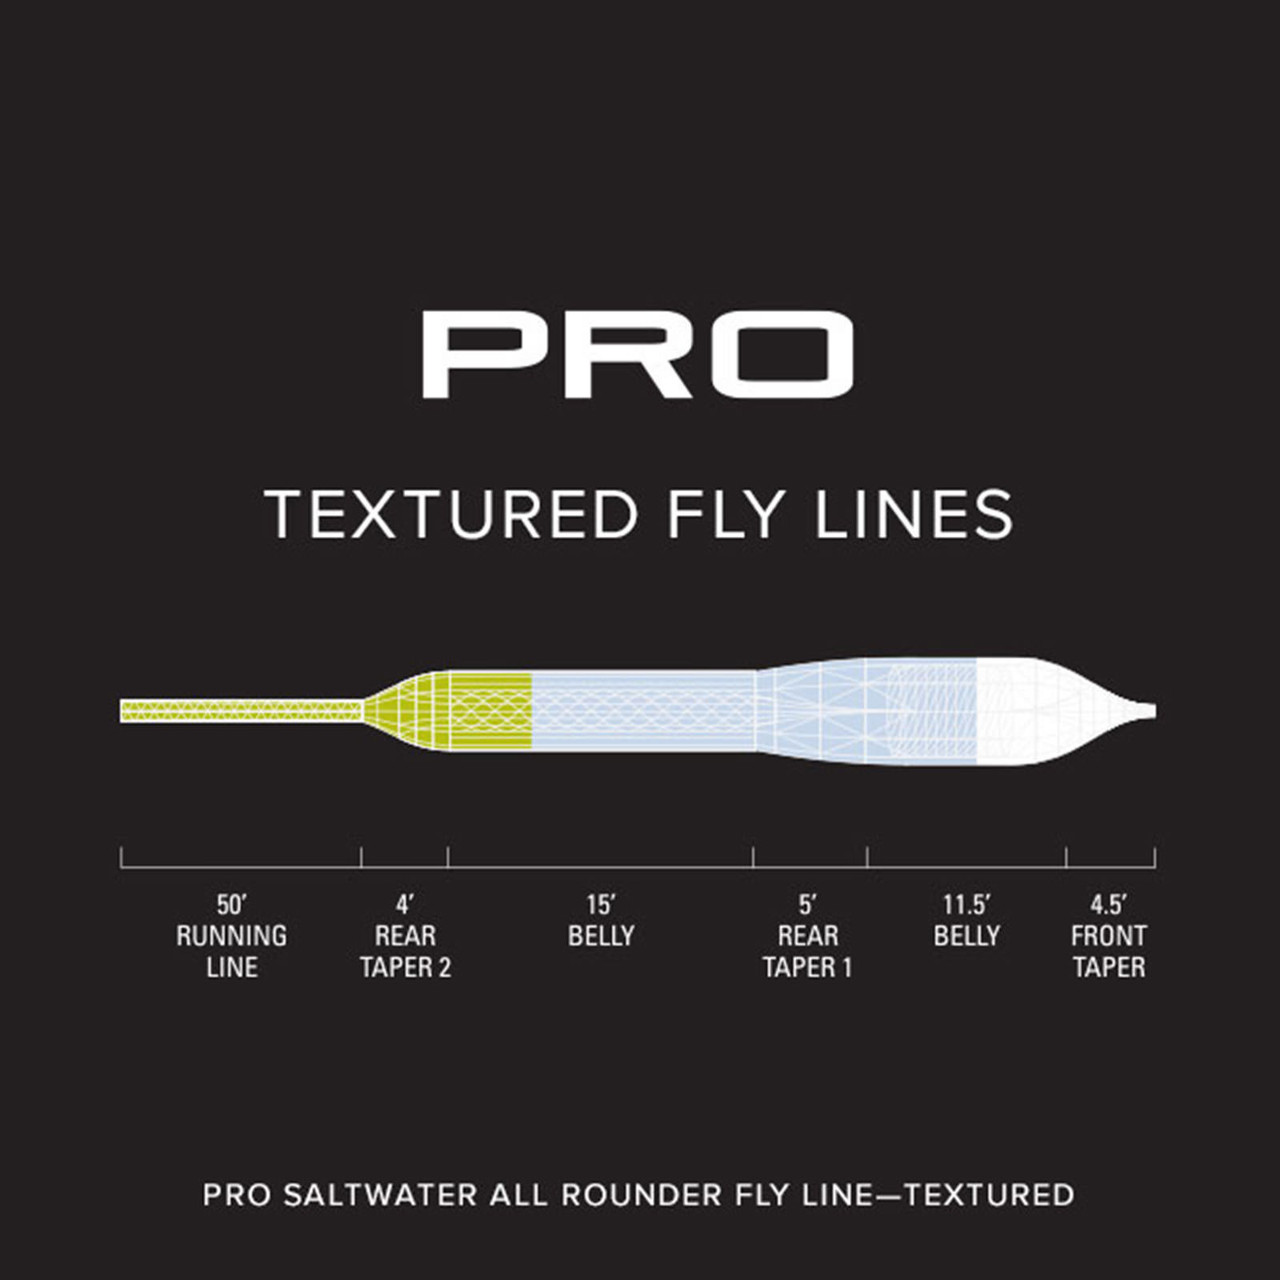 Orvis Pro Saltwater All-Rounder Fly Line - Textured - AvidMax